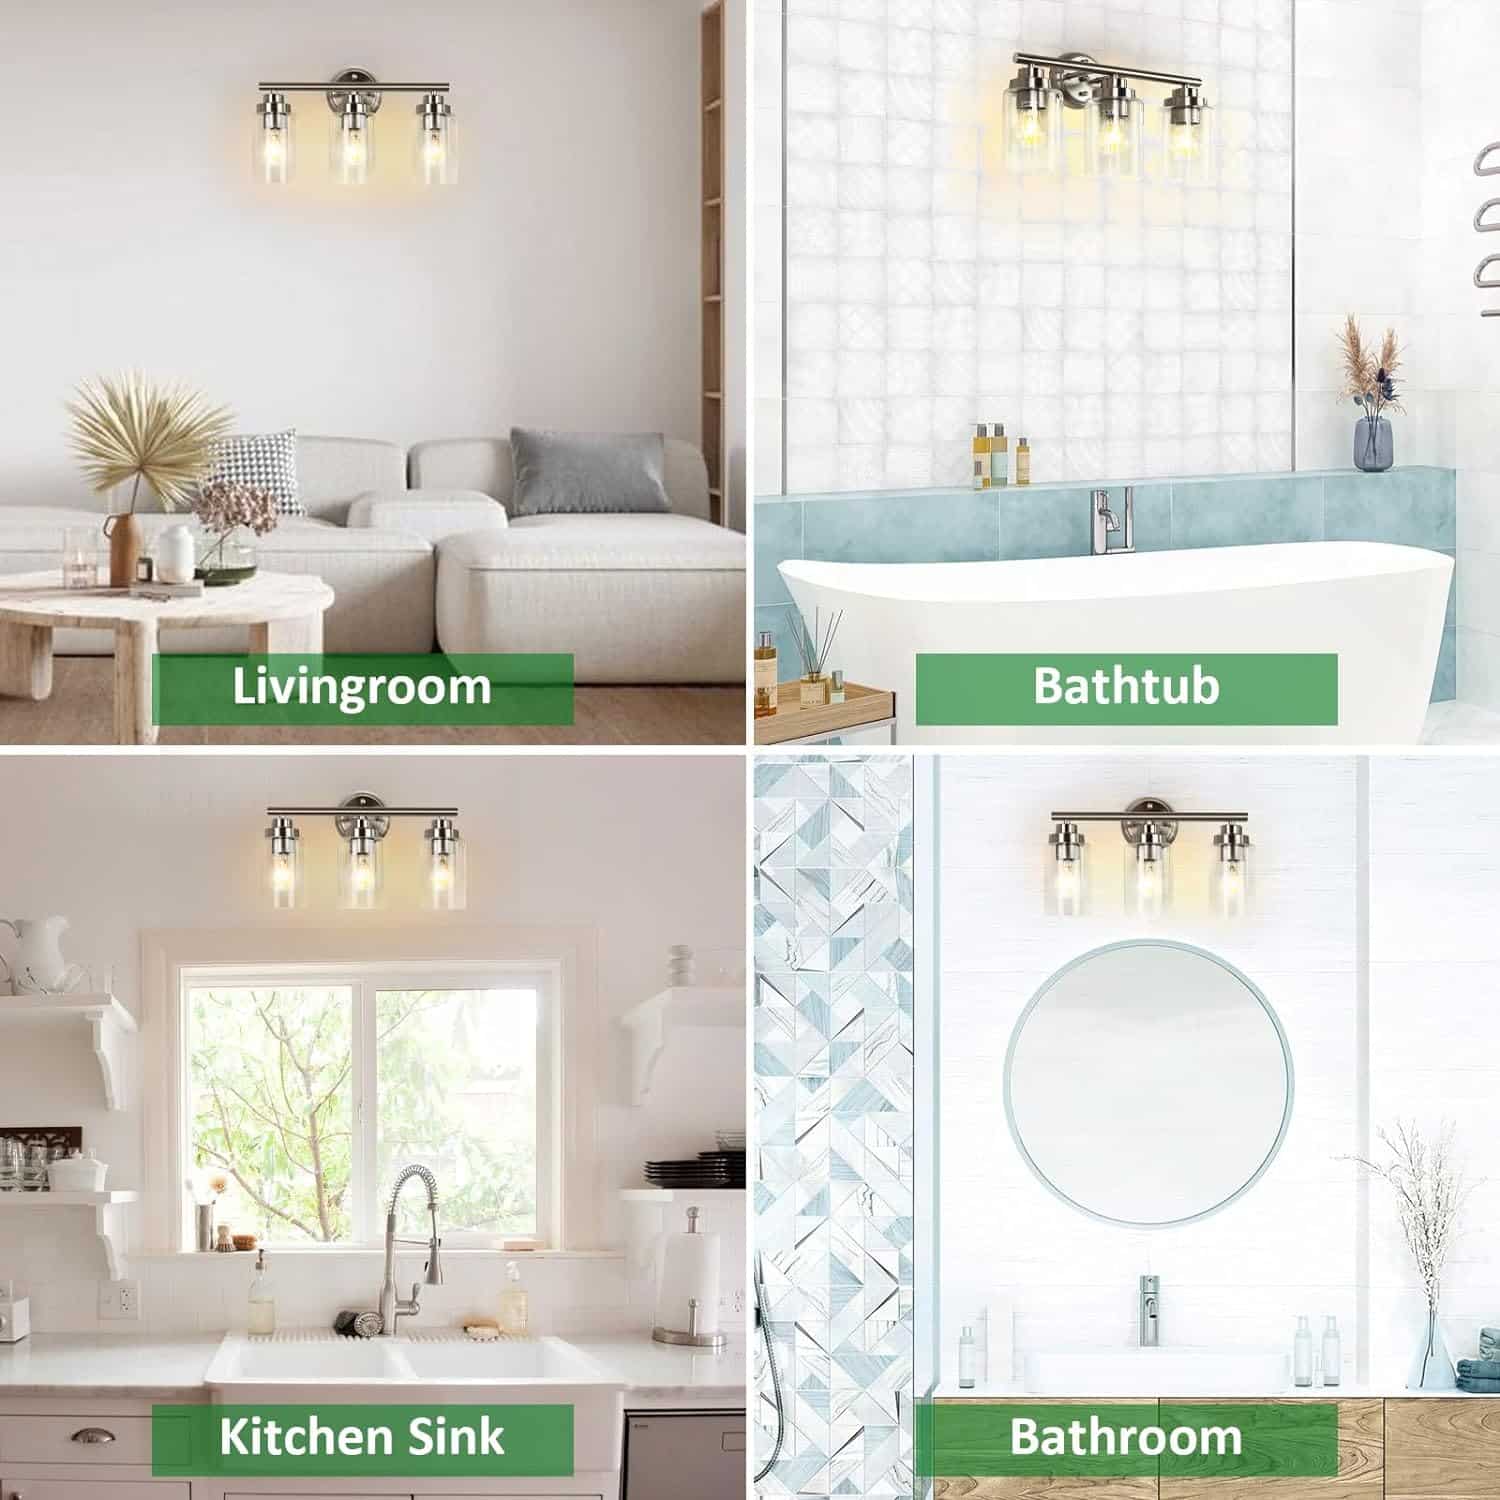 Illuminate Your Space with the DLLT Bathroom Vanity Light Fixture: A Review